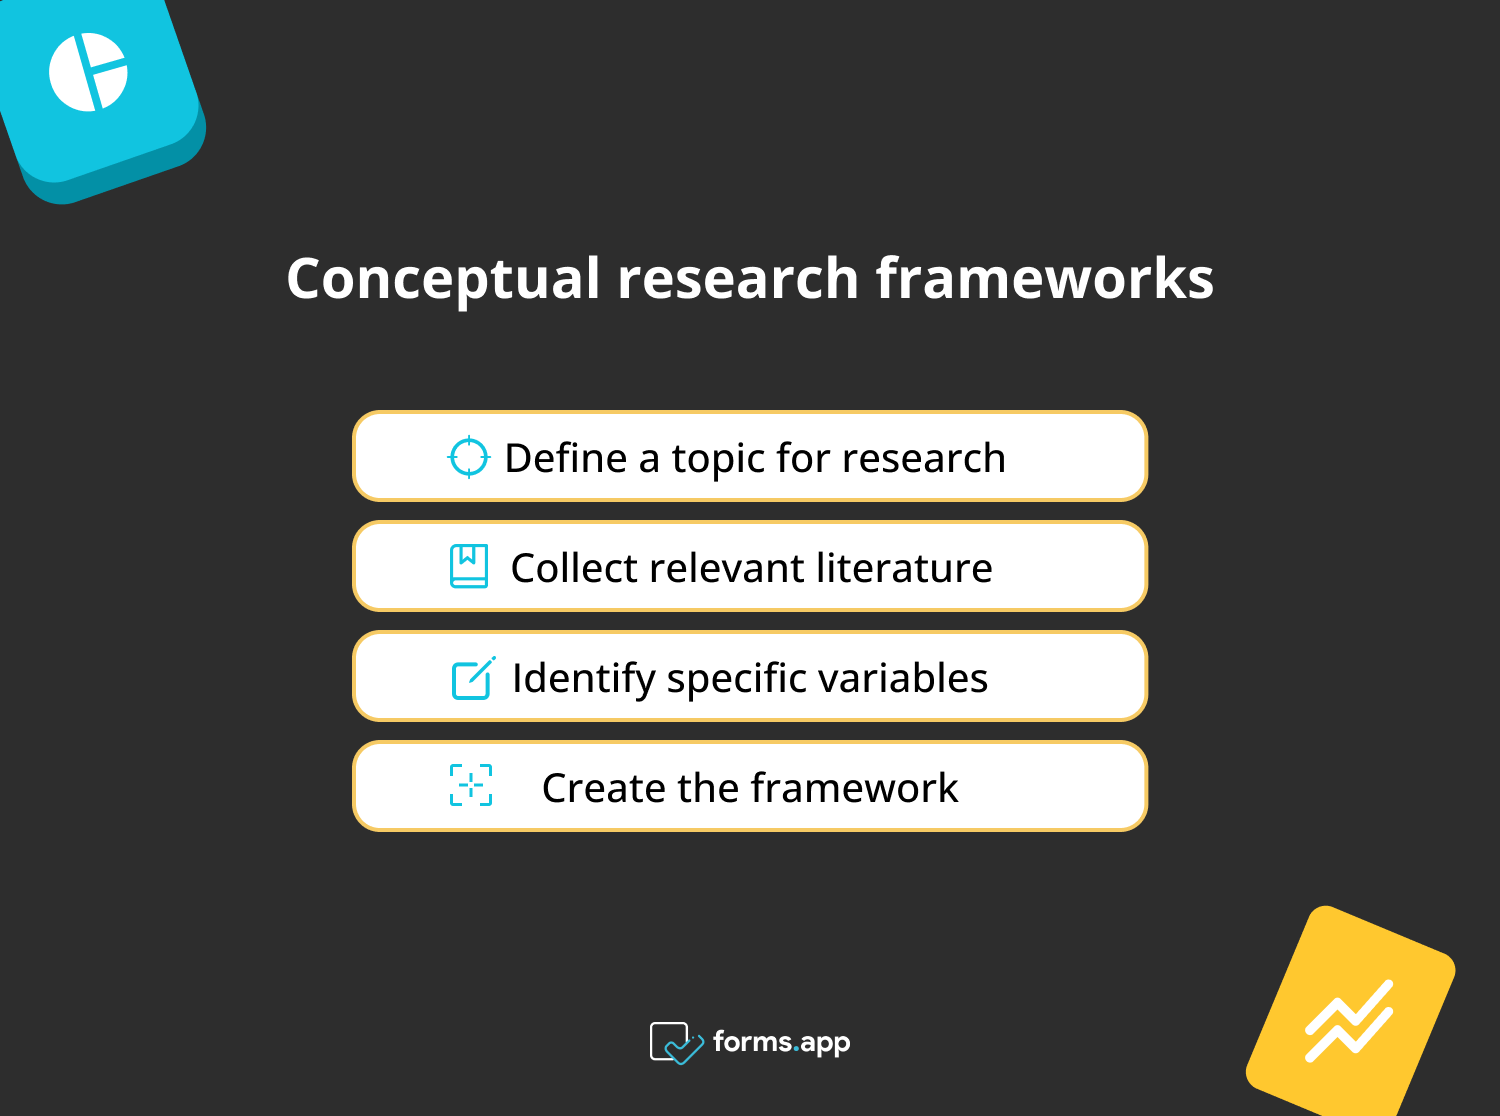 The steps for a conceptual research framework